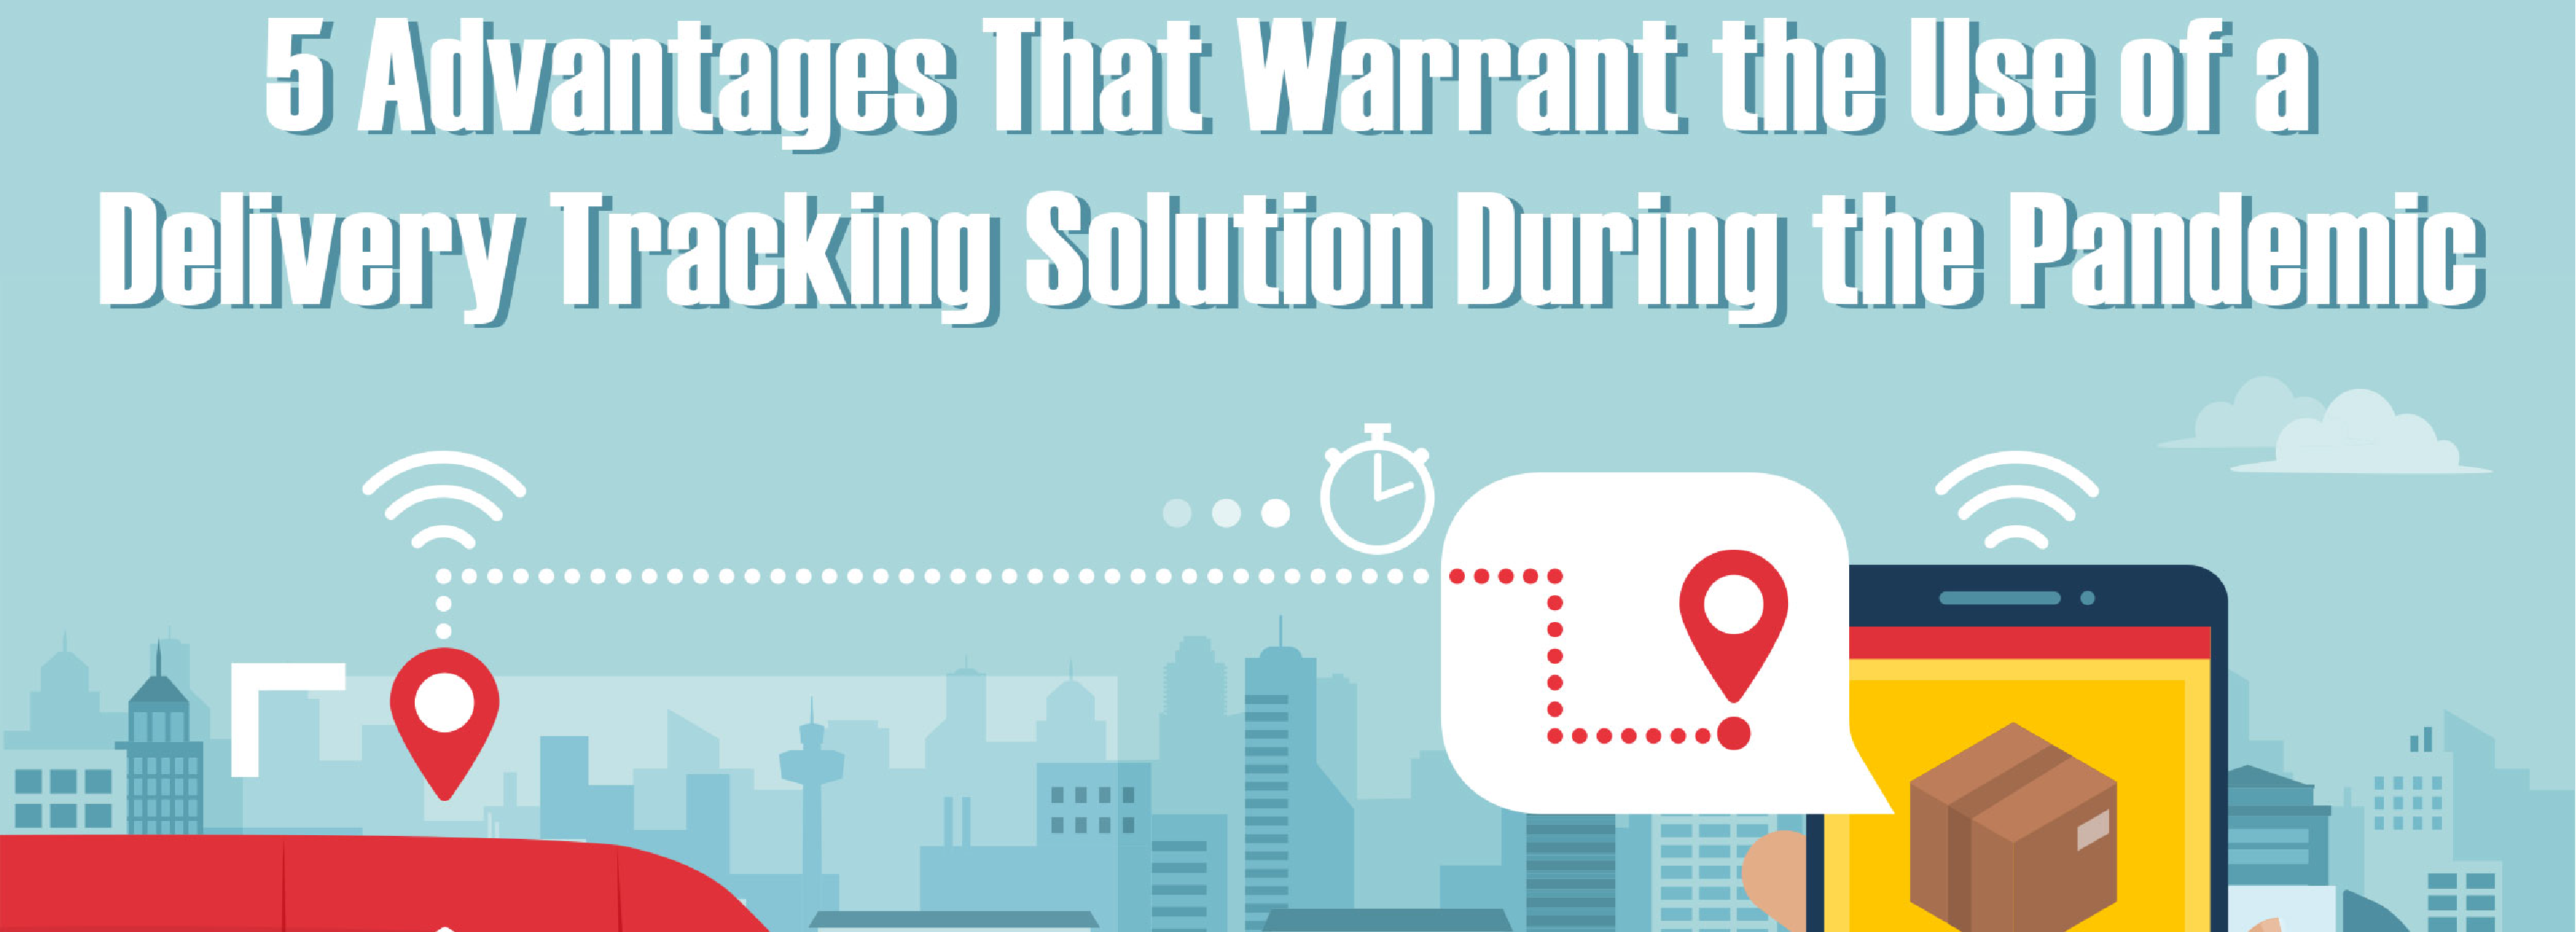 5 Advantages That Warrant the Use of a Delivery Tracking Solution During the Pandemic